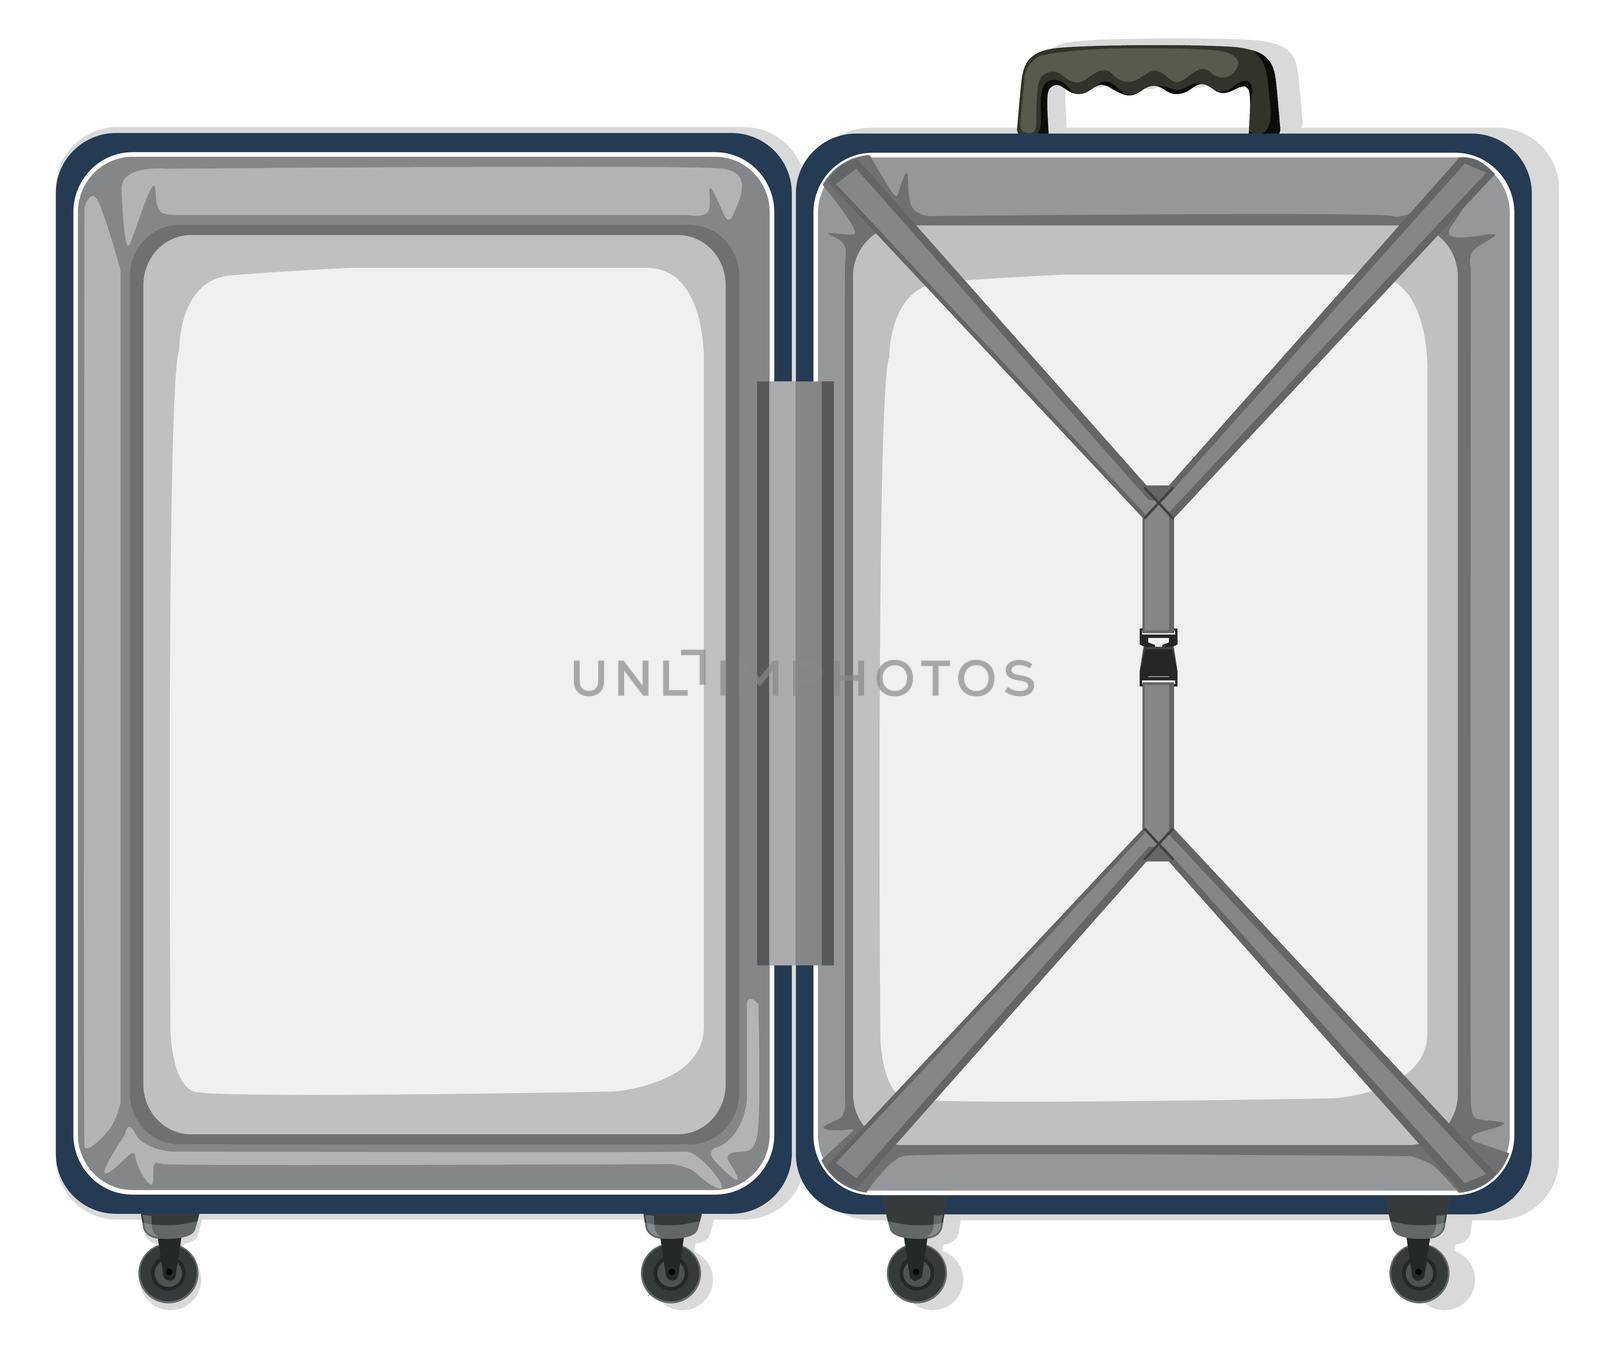 An empty travel luggage by iimages